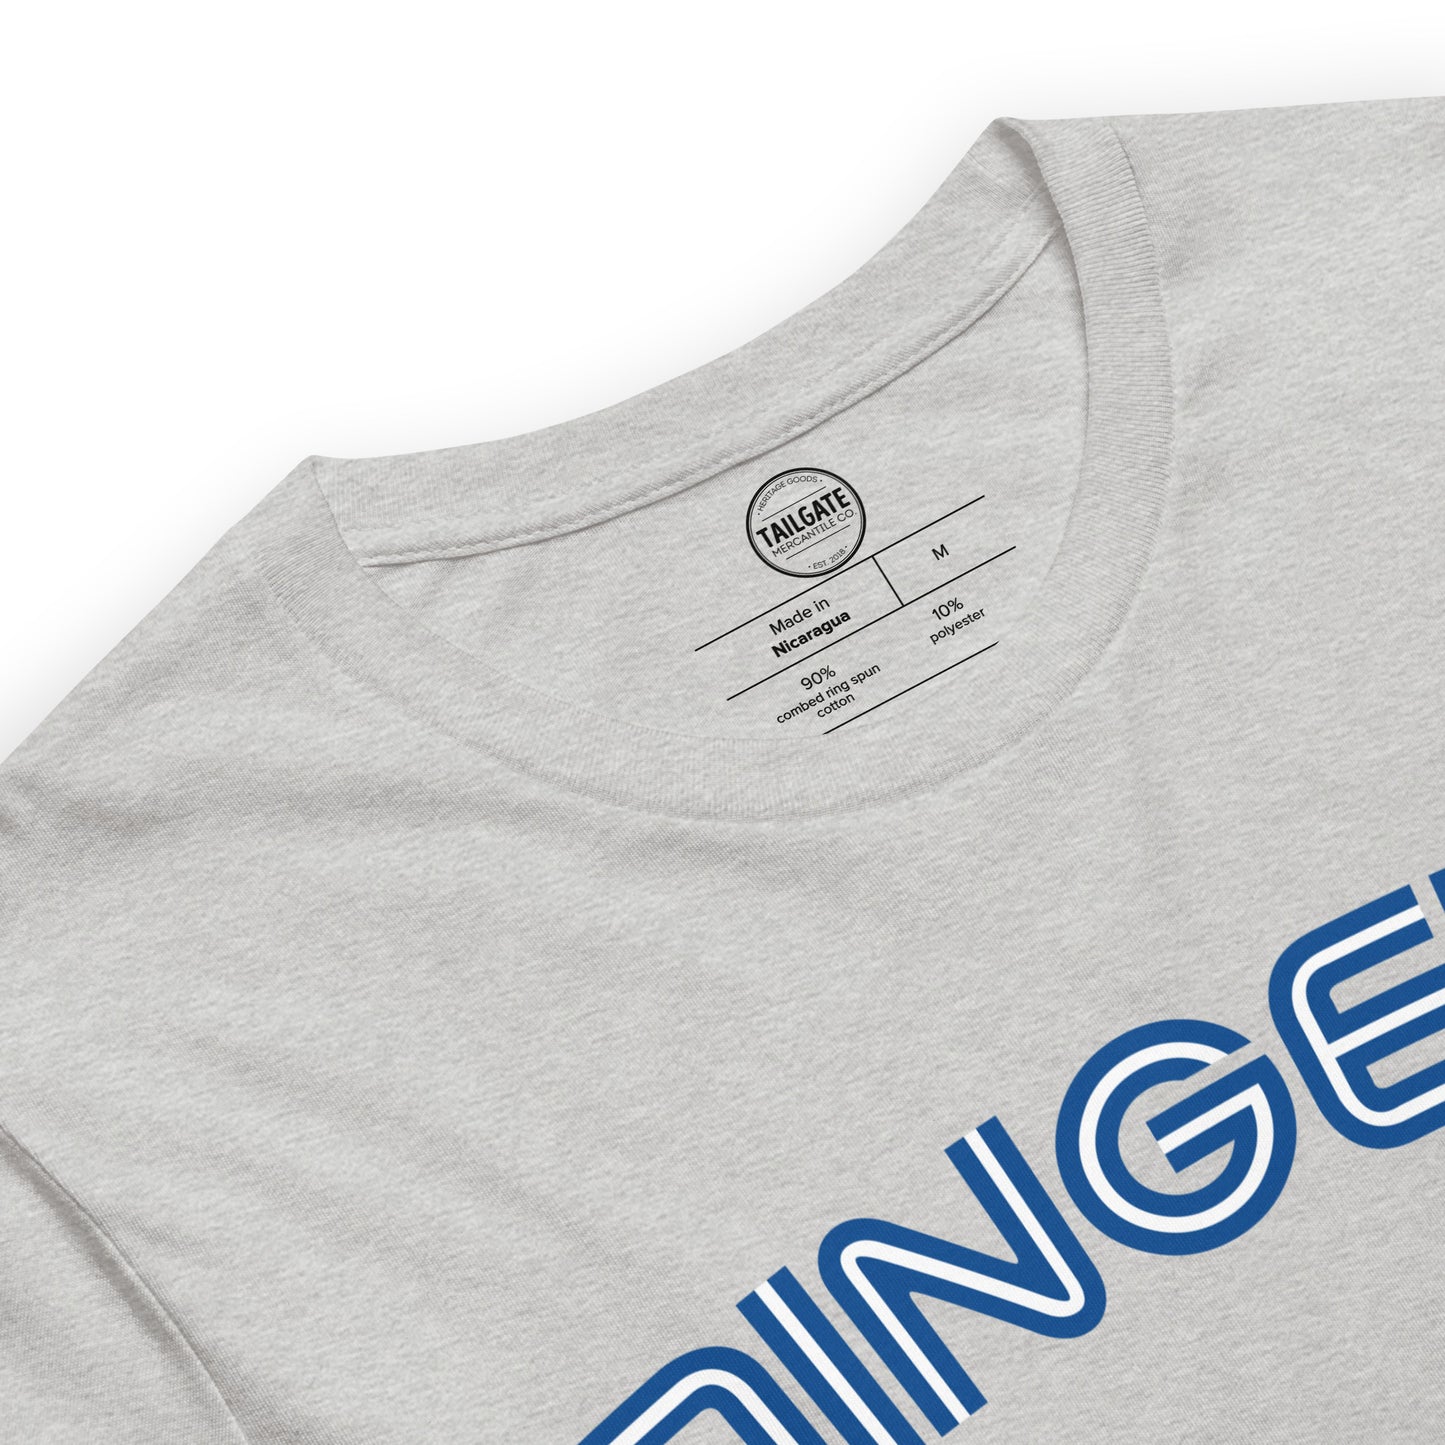 Close up image of heather athletic grey t-shirt with design of "DINGERS" in Toronto Blue Jays retro blue style font located on centre chest. Neck tag information also included in image. This design is exclusive to Tailgate Mercantile and available only online.